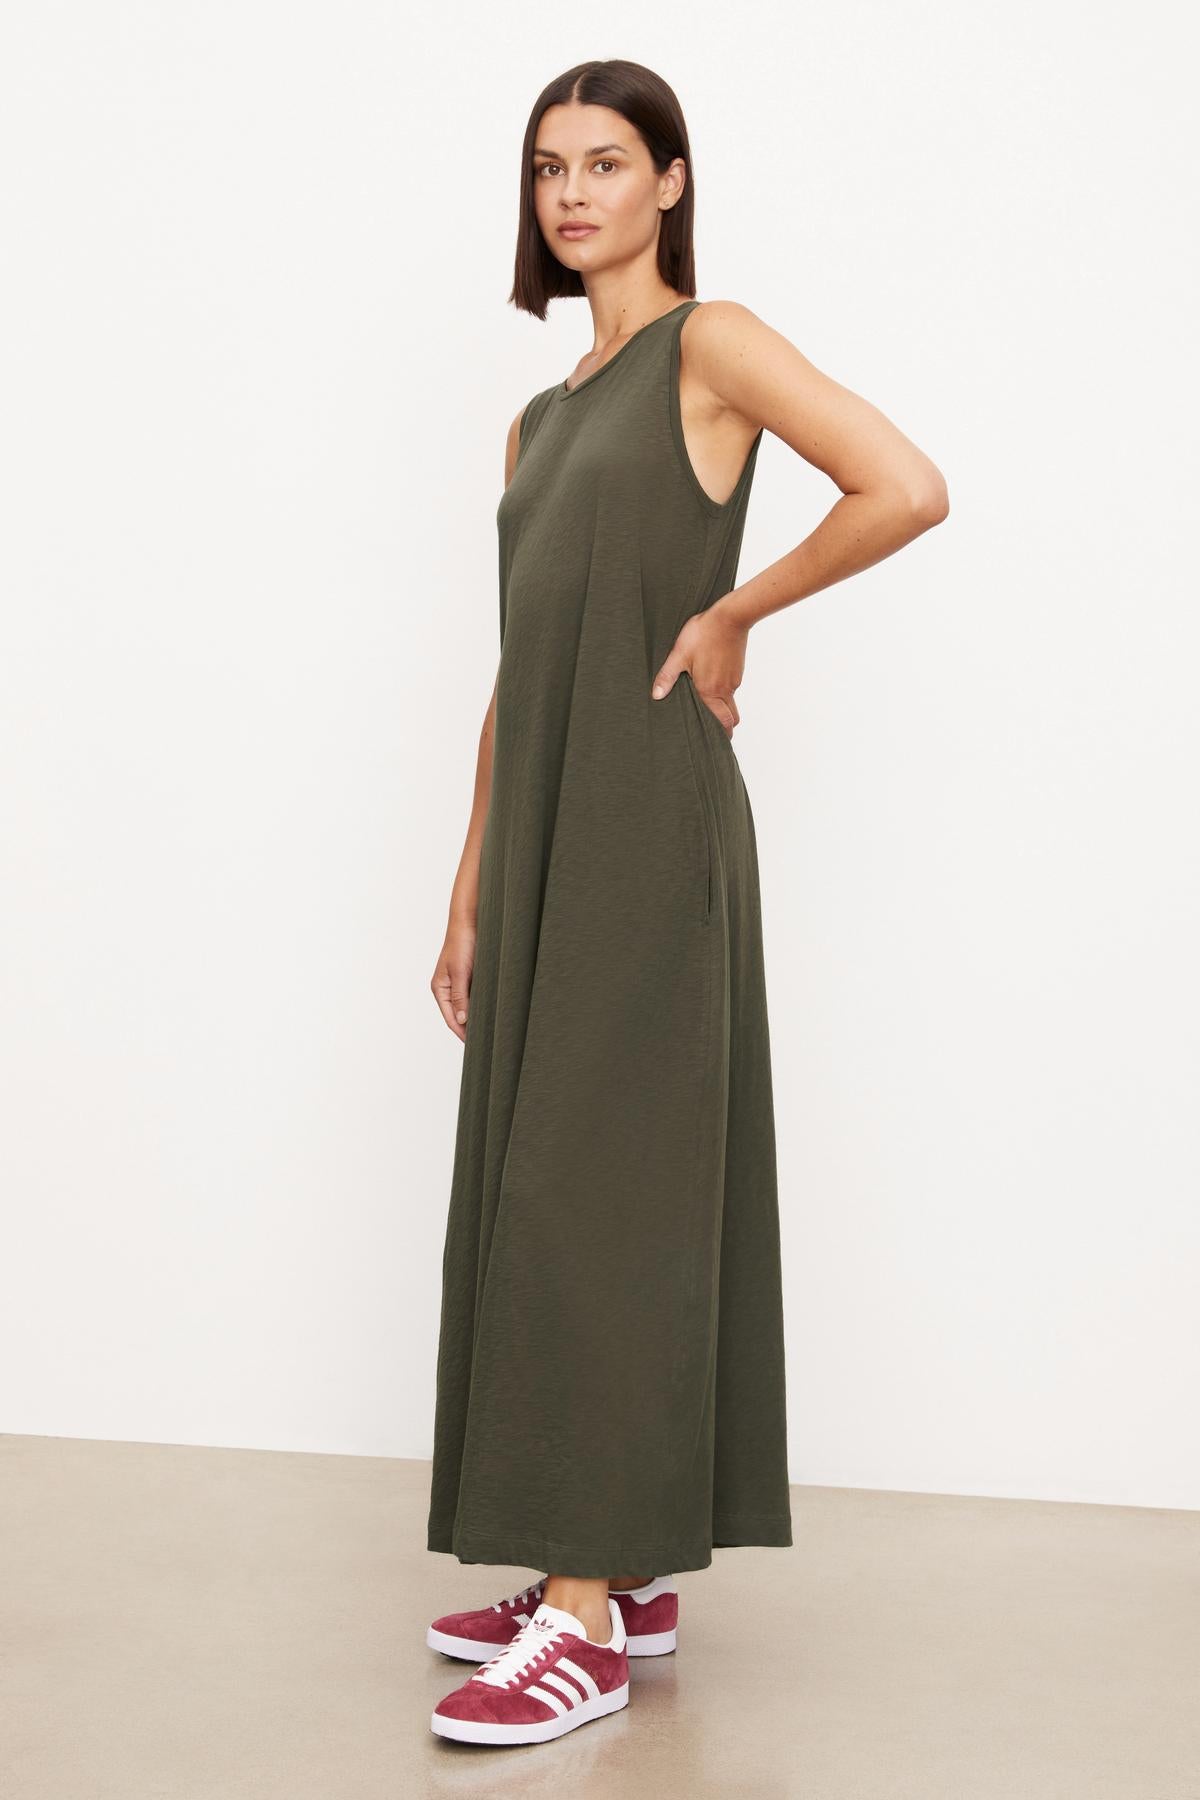 The model is wearing an olive green EDITH SLEEVELESS MAXI DRESS by Velvet by Graham & Spencer with a long silhouette.-35701765800129